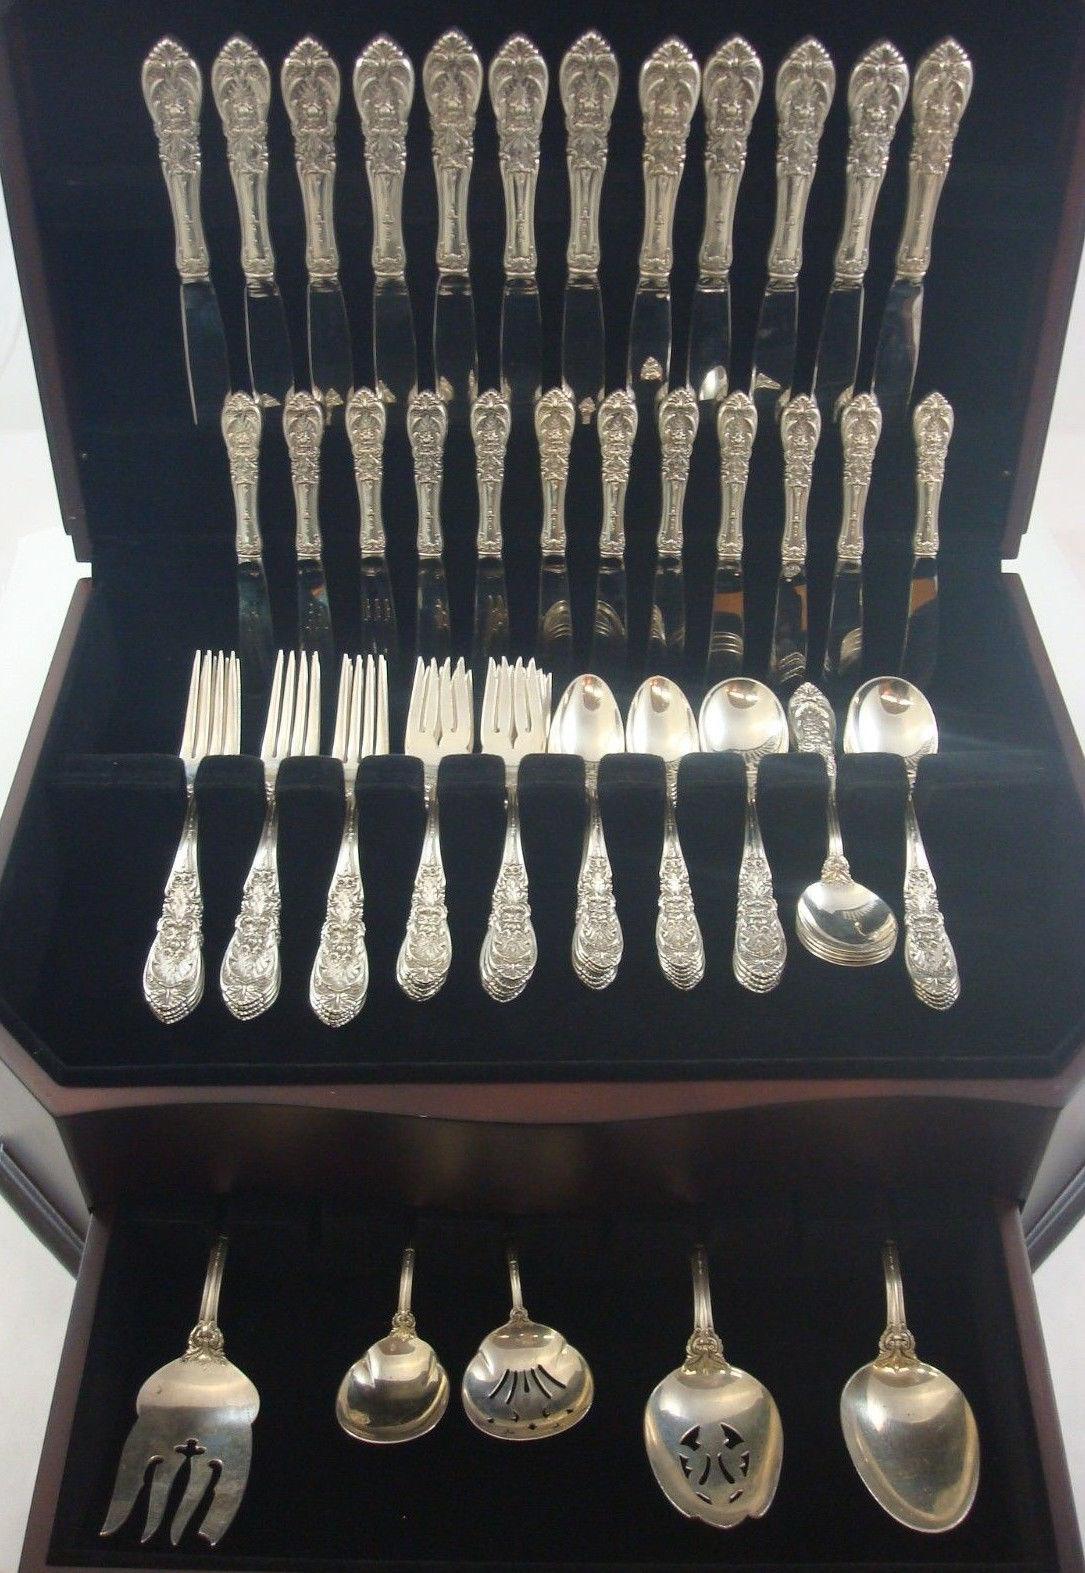 Stunning Richelieu by International sterling silver flatware set, 77 pieces. This set includes:

12 knives, 9 1/4